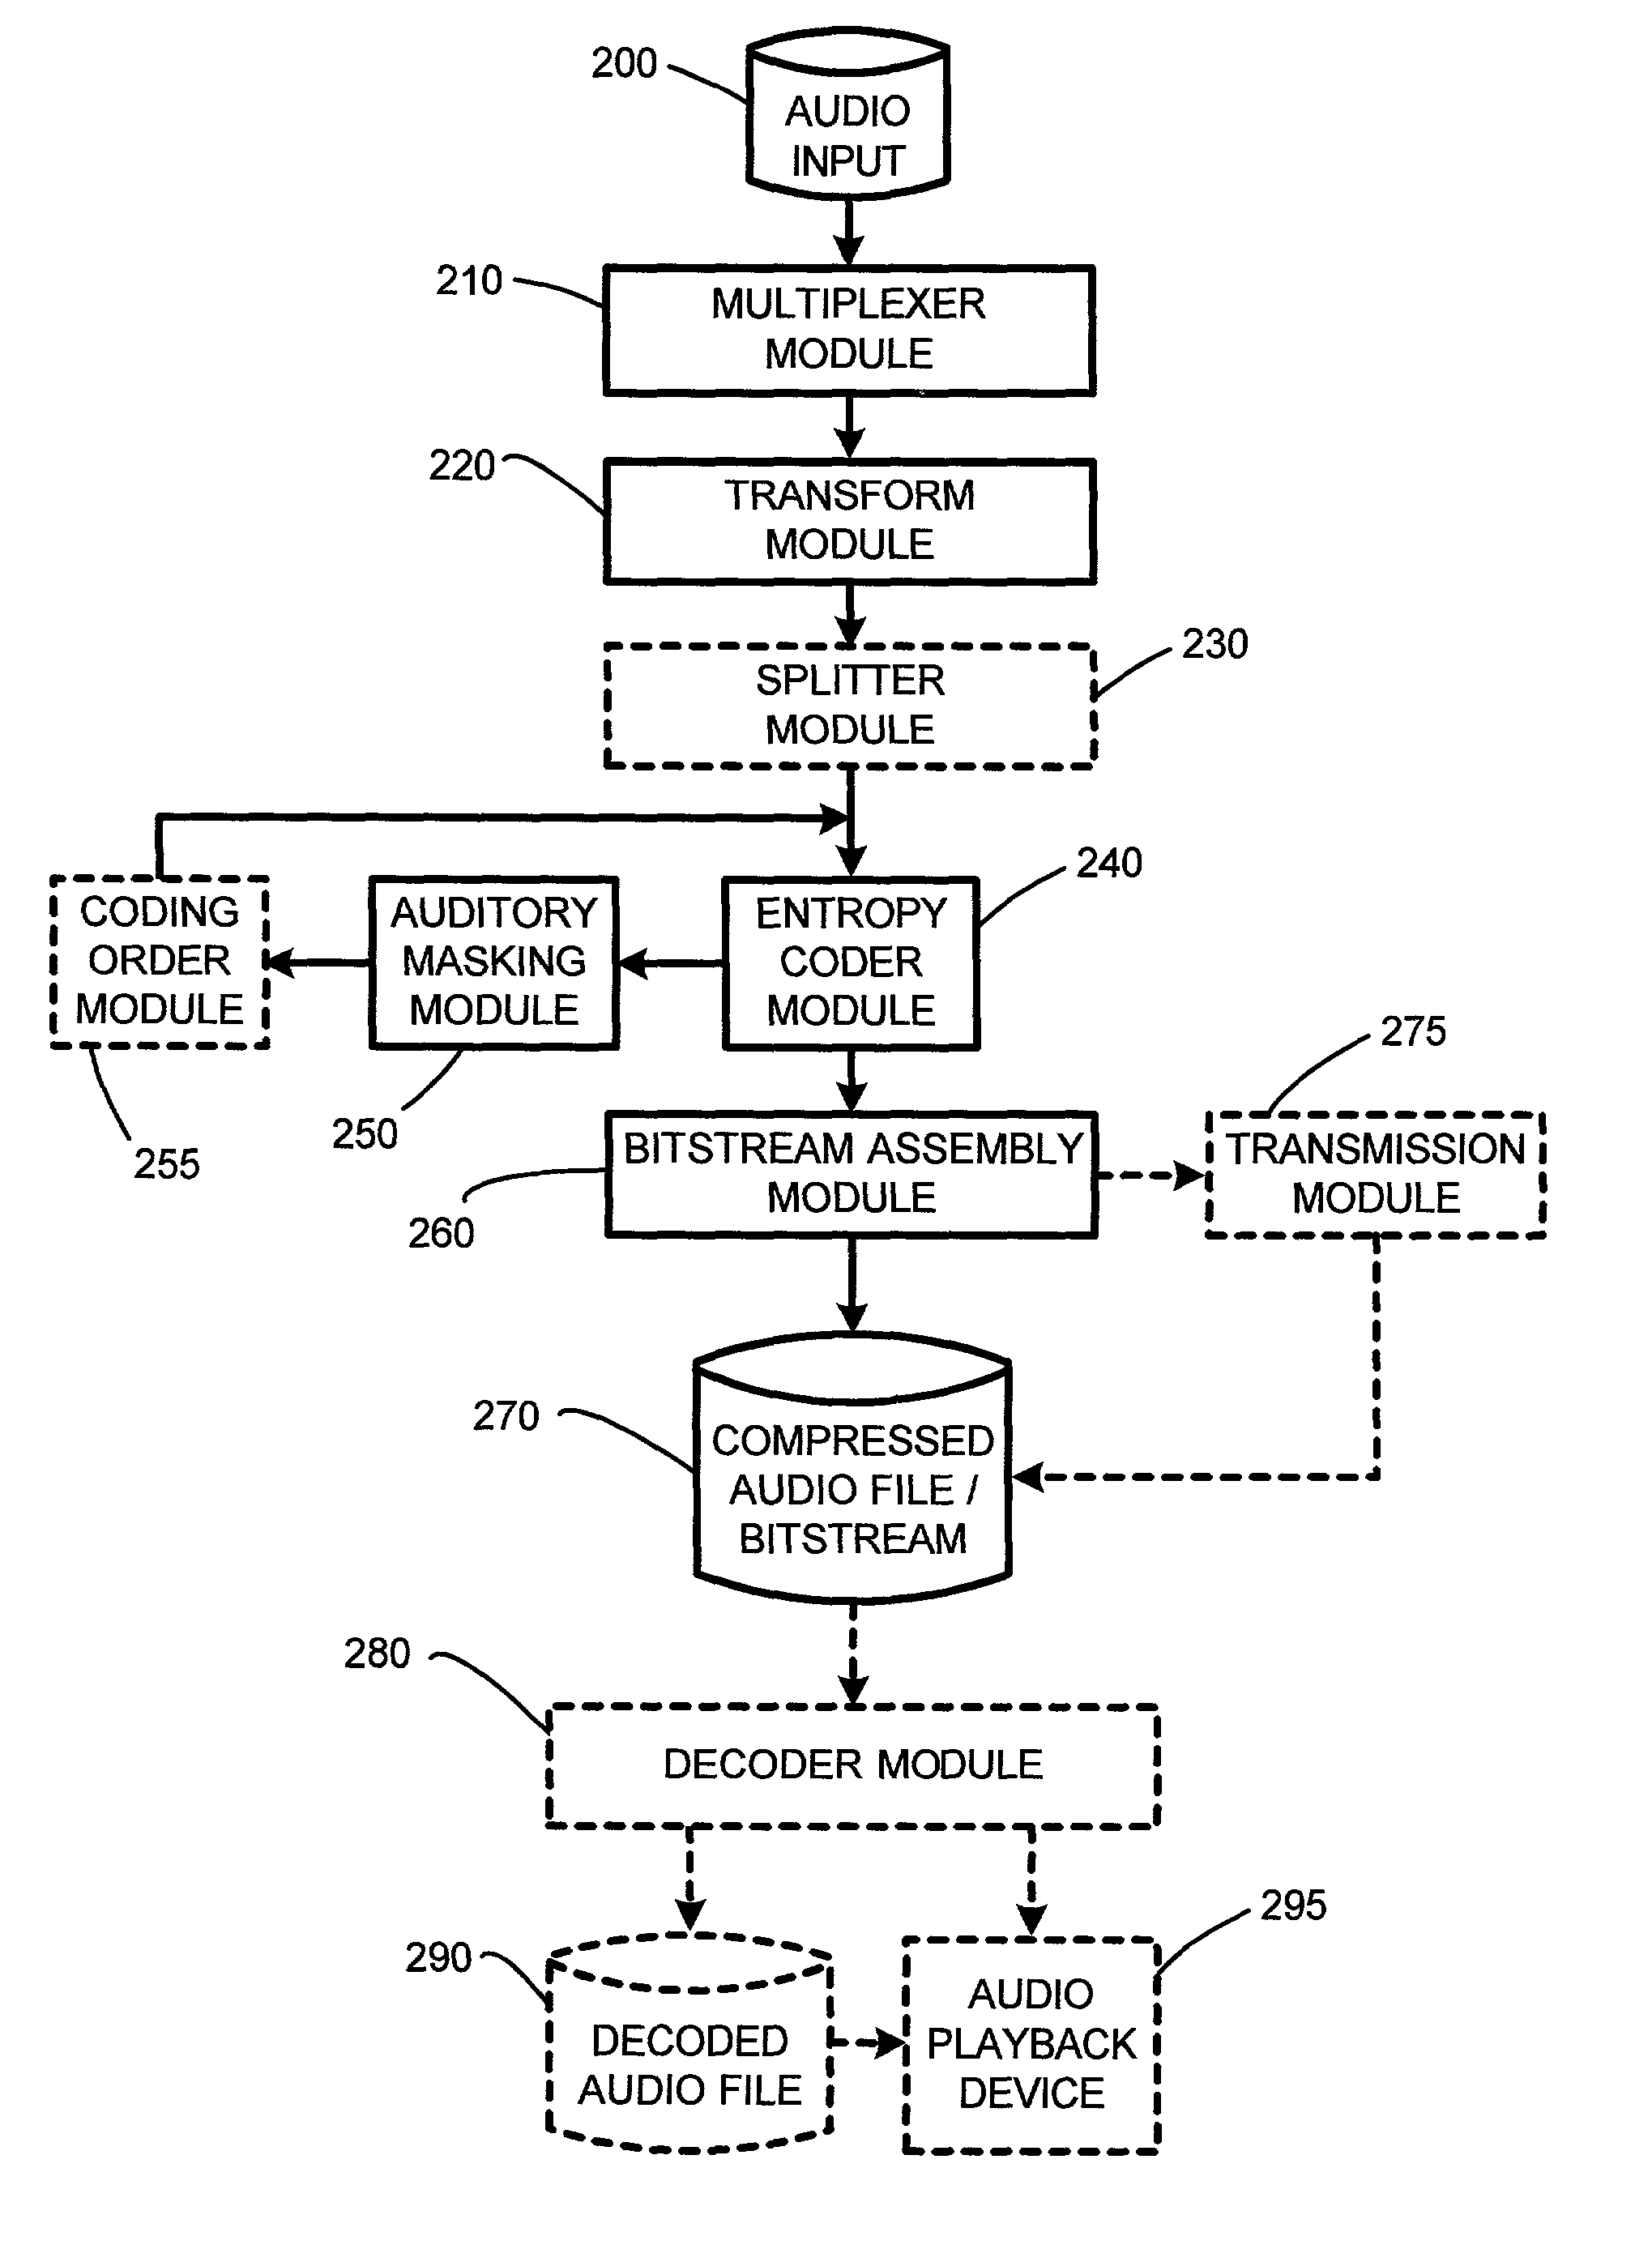 System and method for embedded audio coding with implicit auditory masking